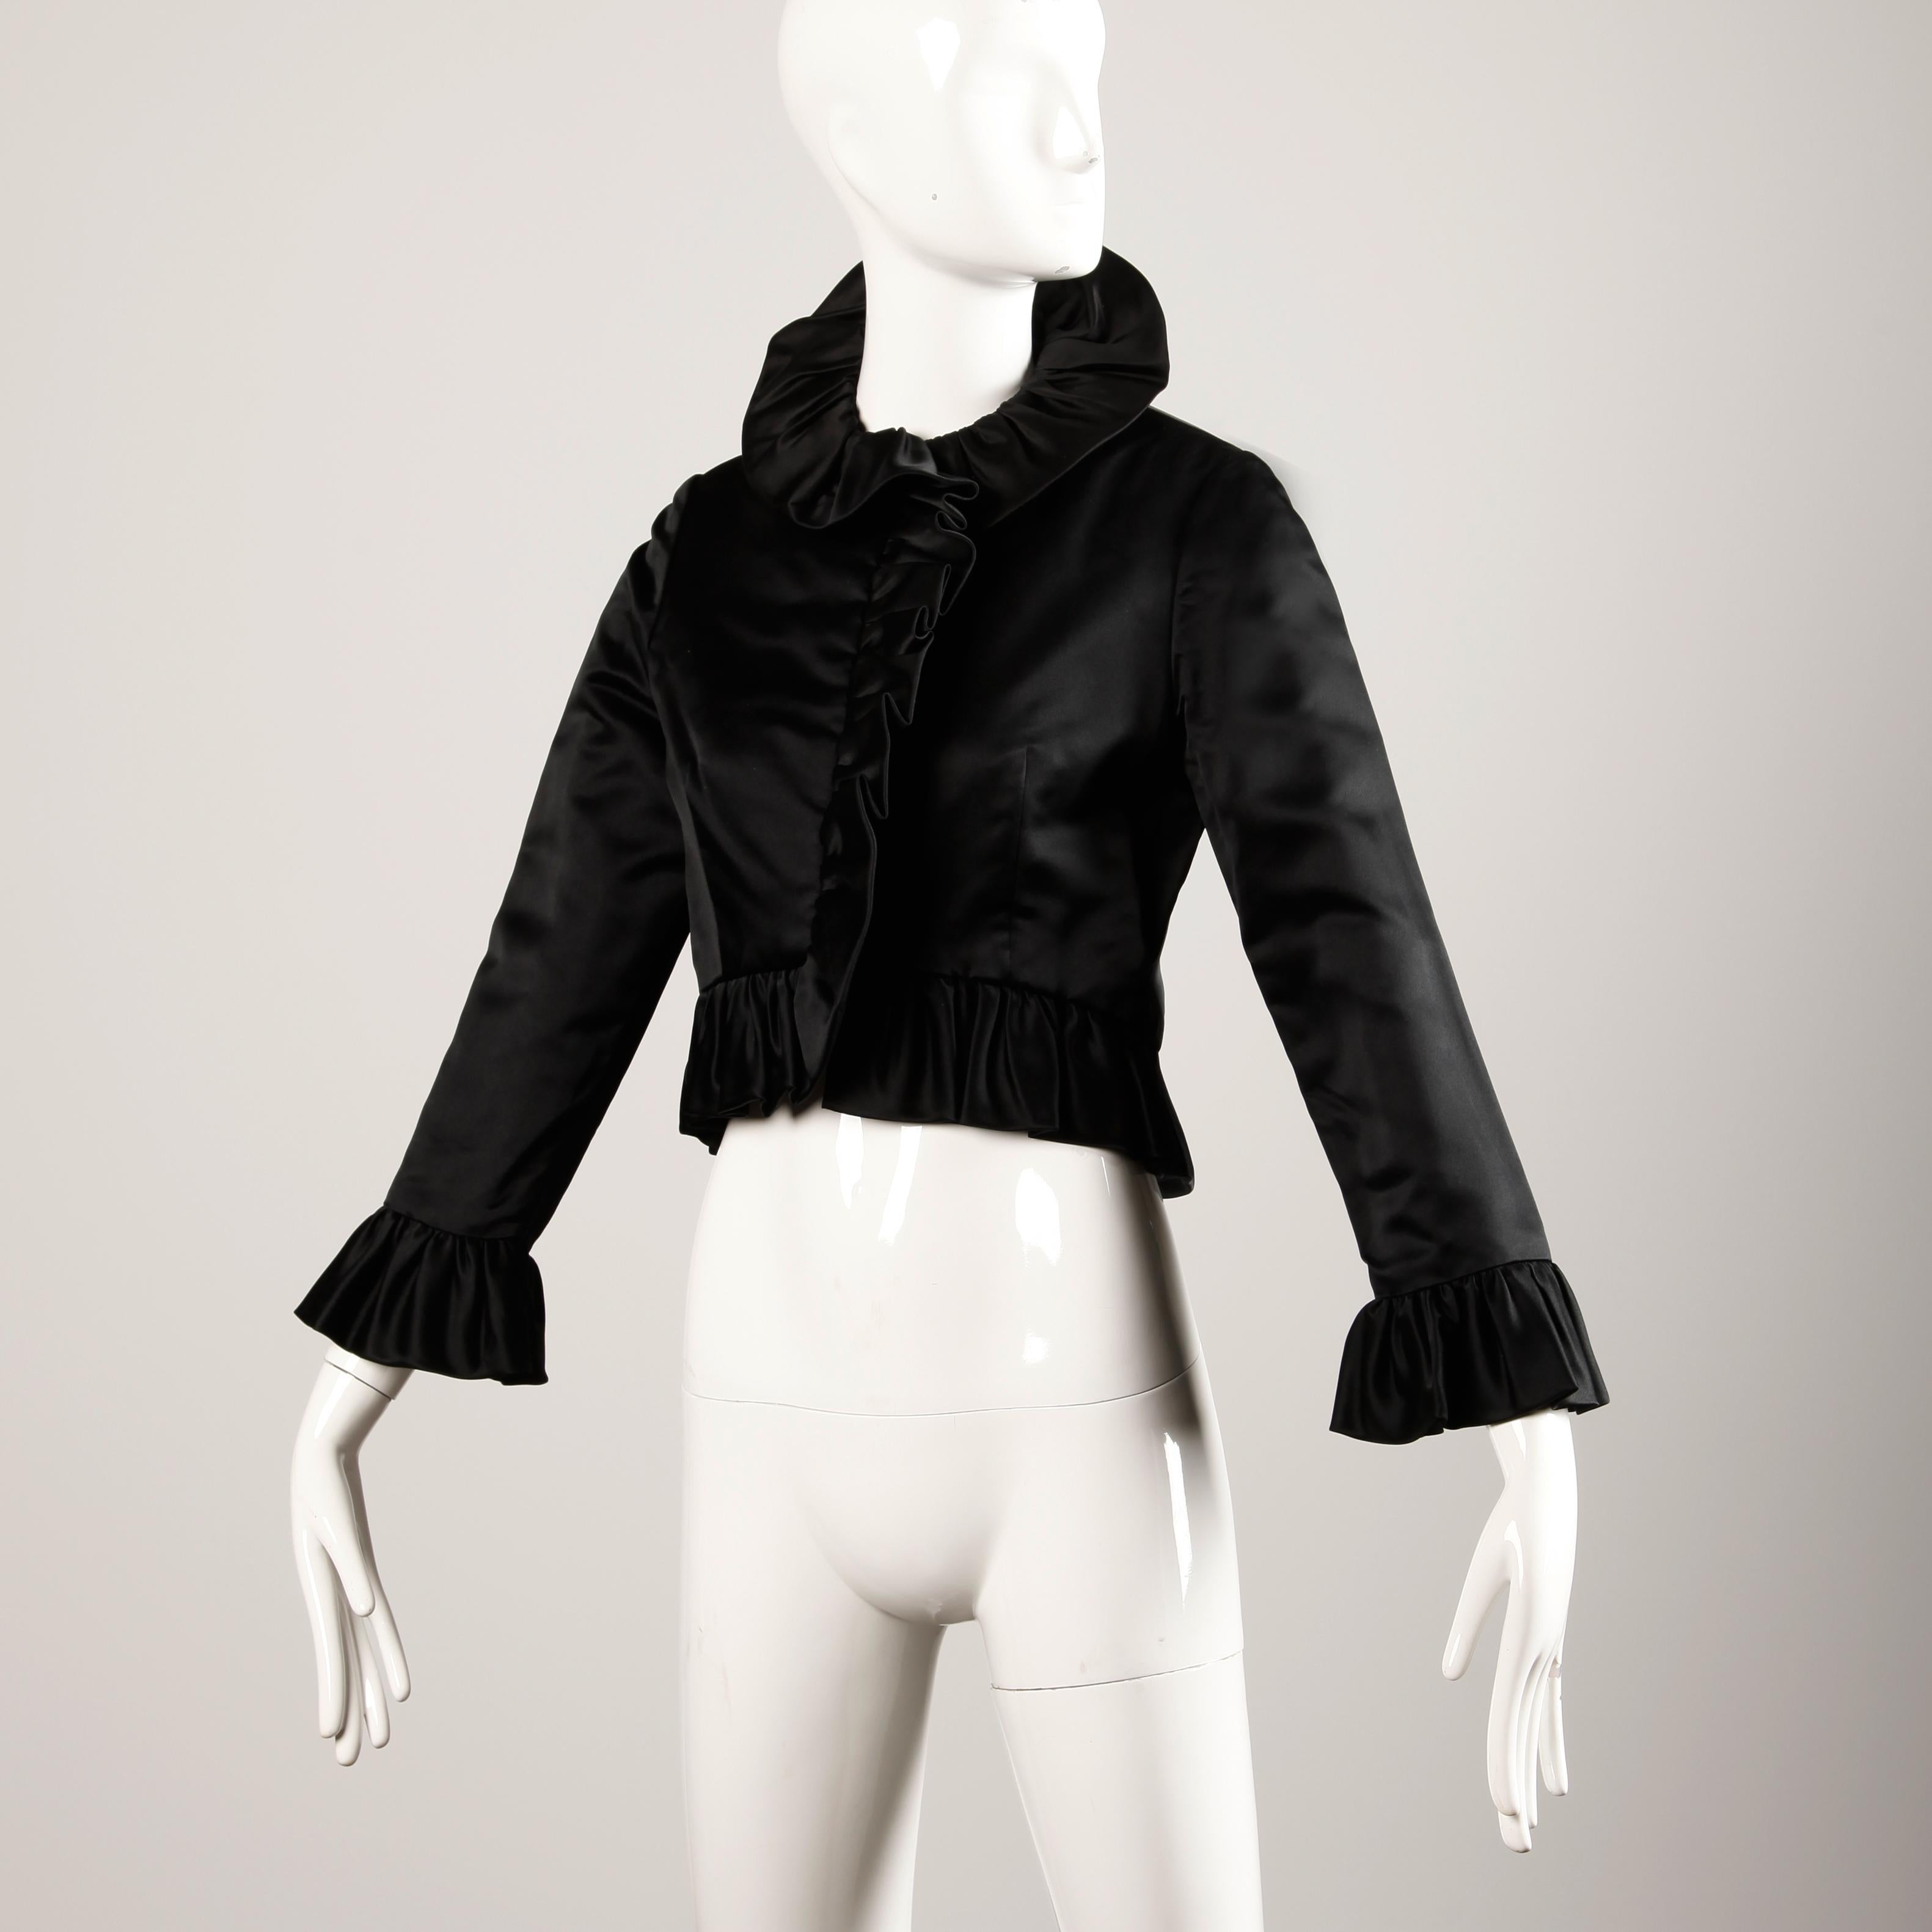 Michael Novarese Vintage 1970s Black Silk Satin Evening Jacket with Ruffle For Sale 2